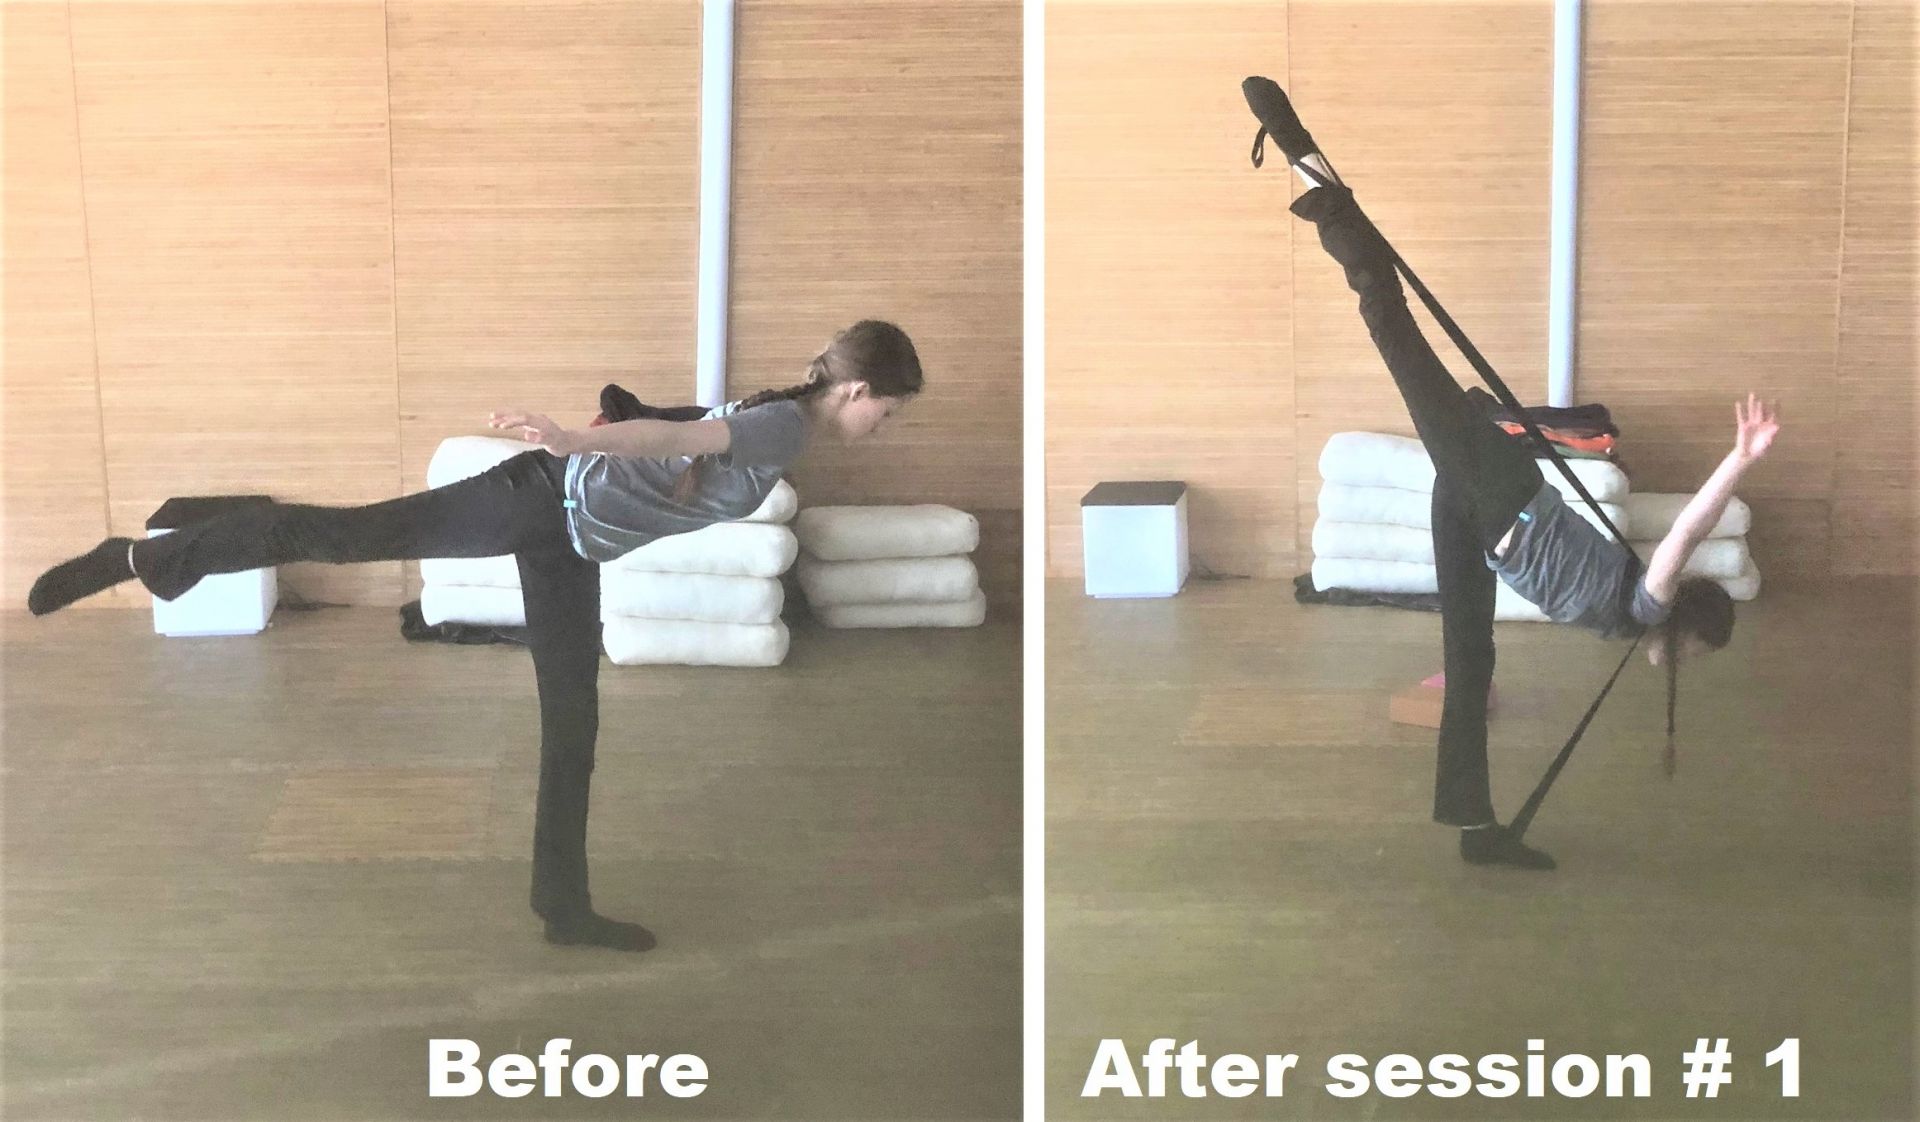 Ballet dancer before & after results penche is 5 times higher using Stacey Stretch Strap